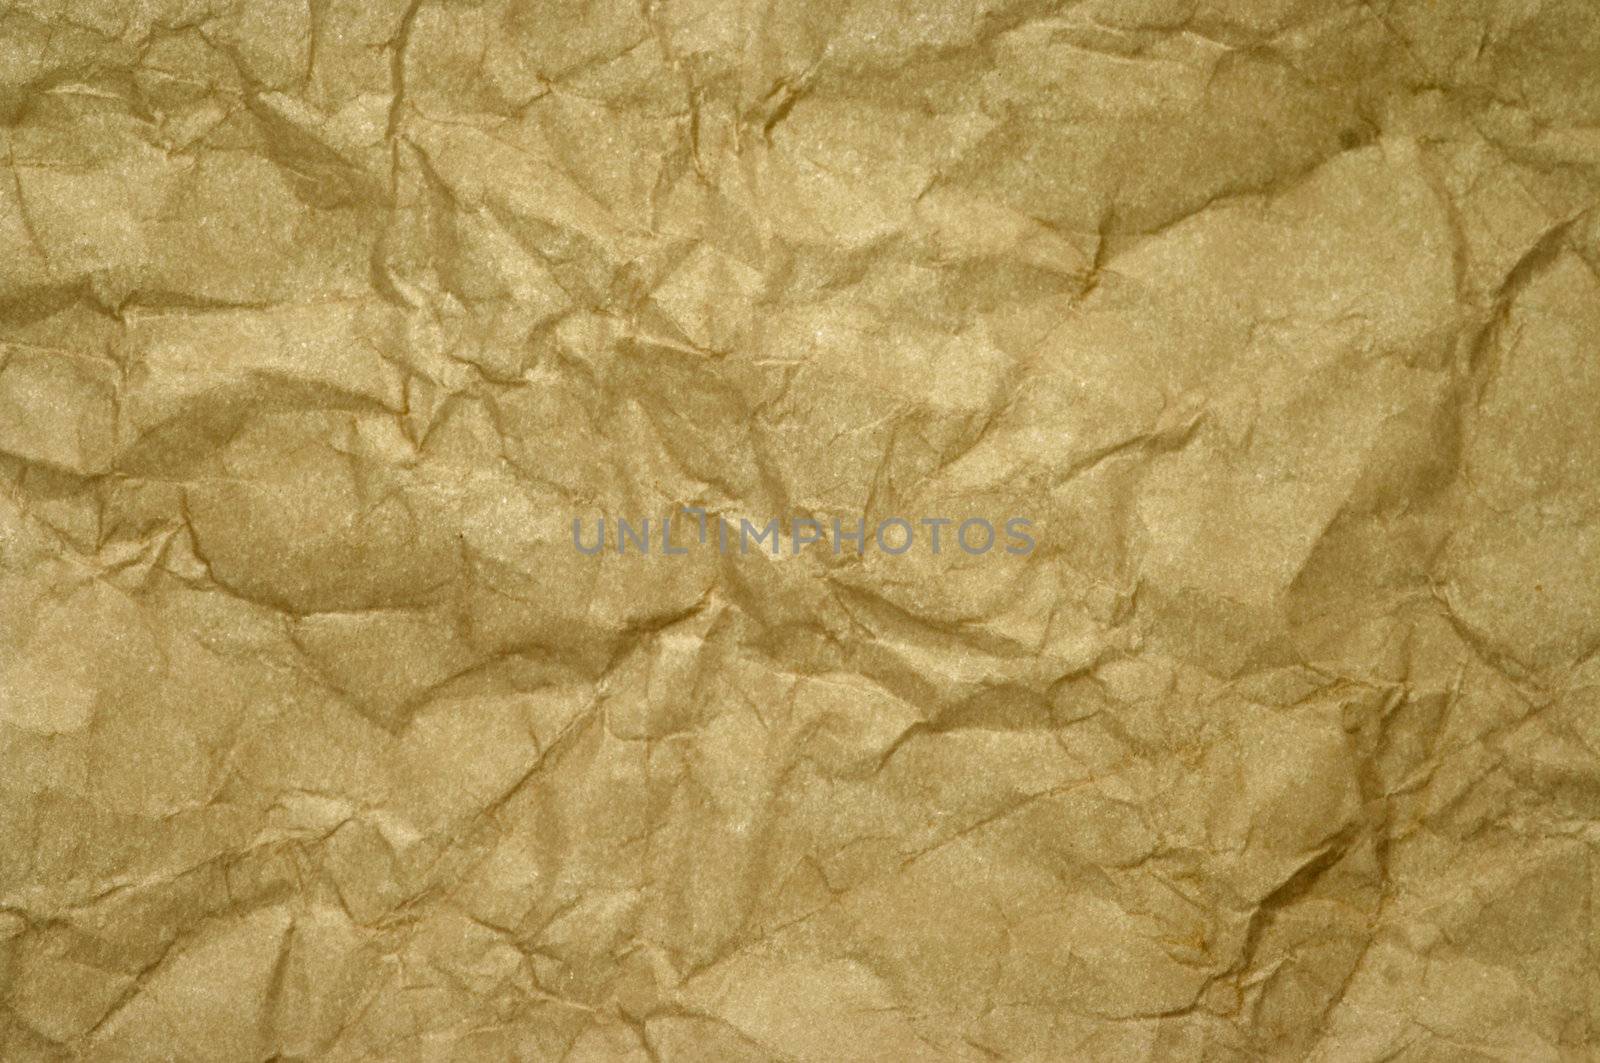 old crumpled paper by Mibuch